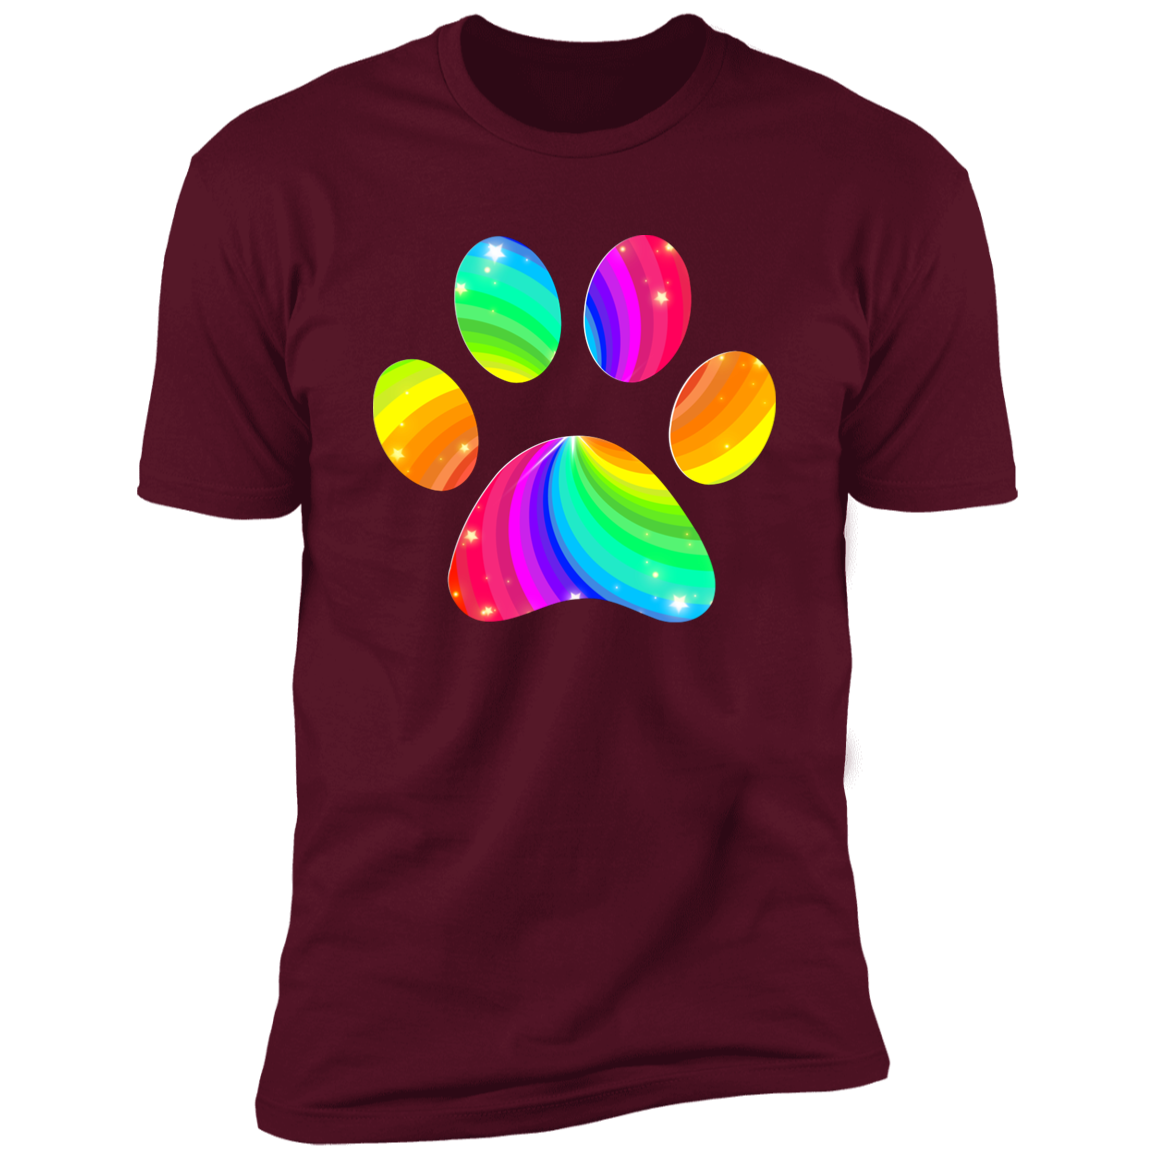 Pride Paw 2023 (Flag) Pride T-shirt, Paw Pride Dog Shirt for humans, in maroon